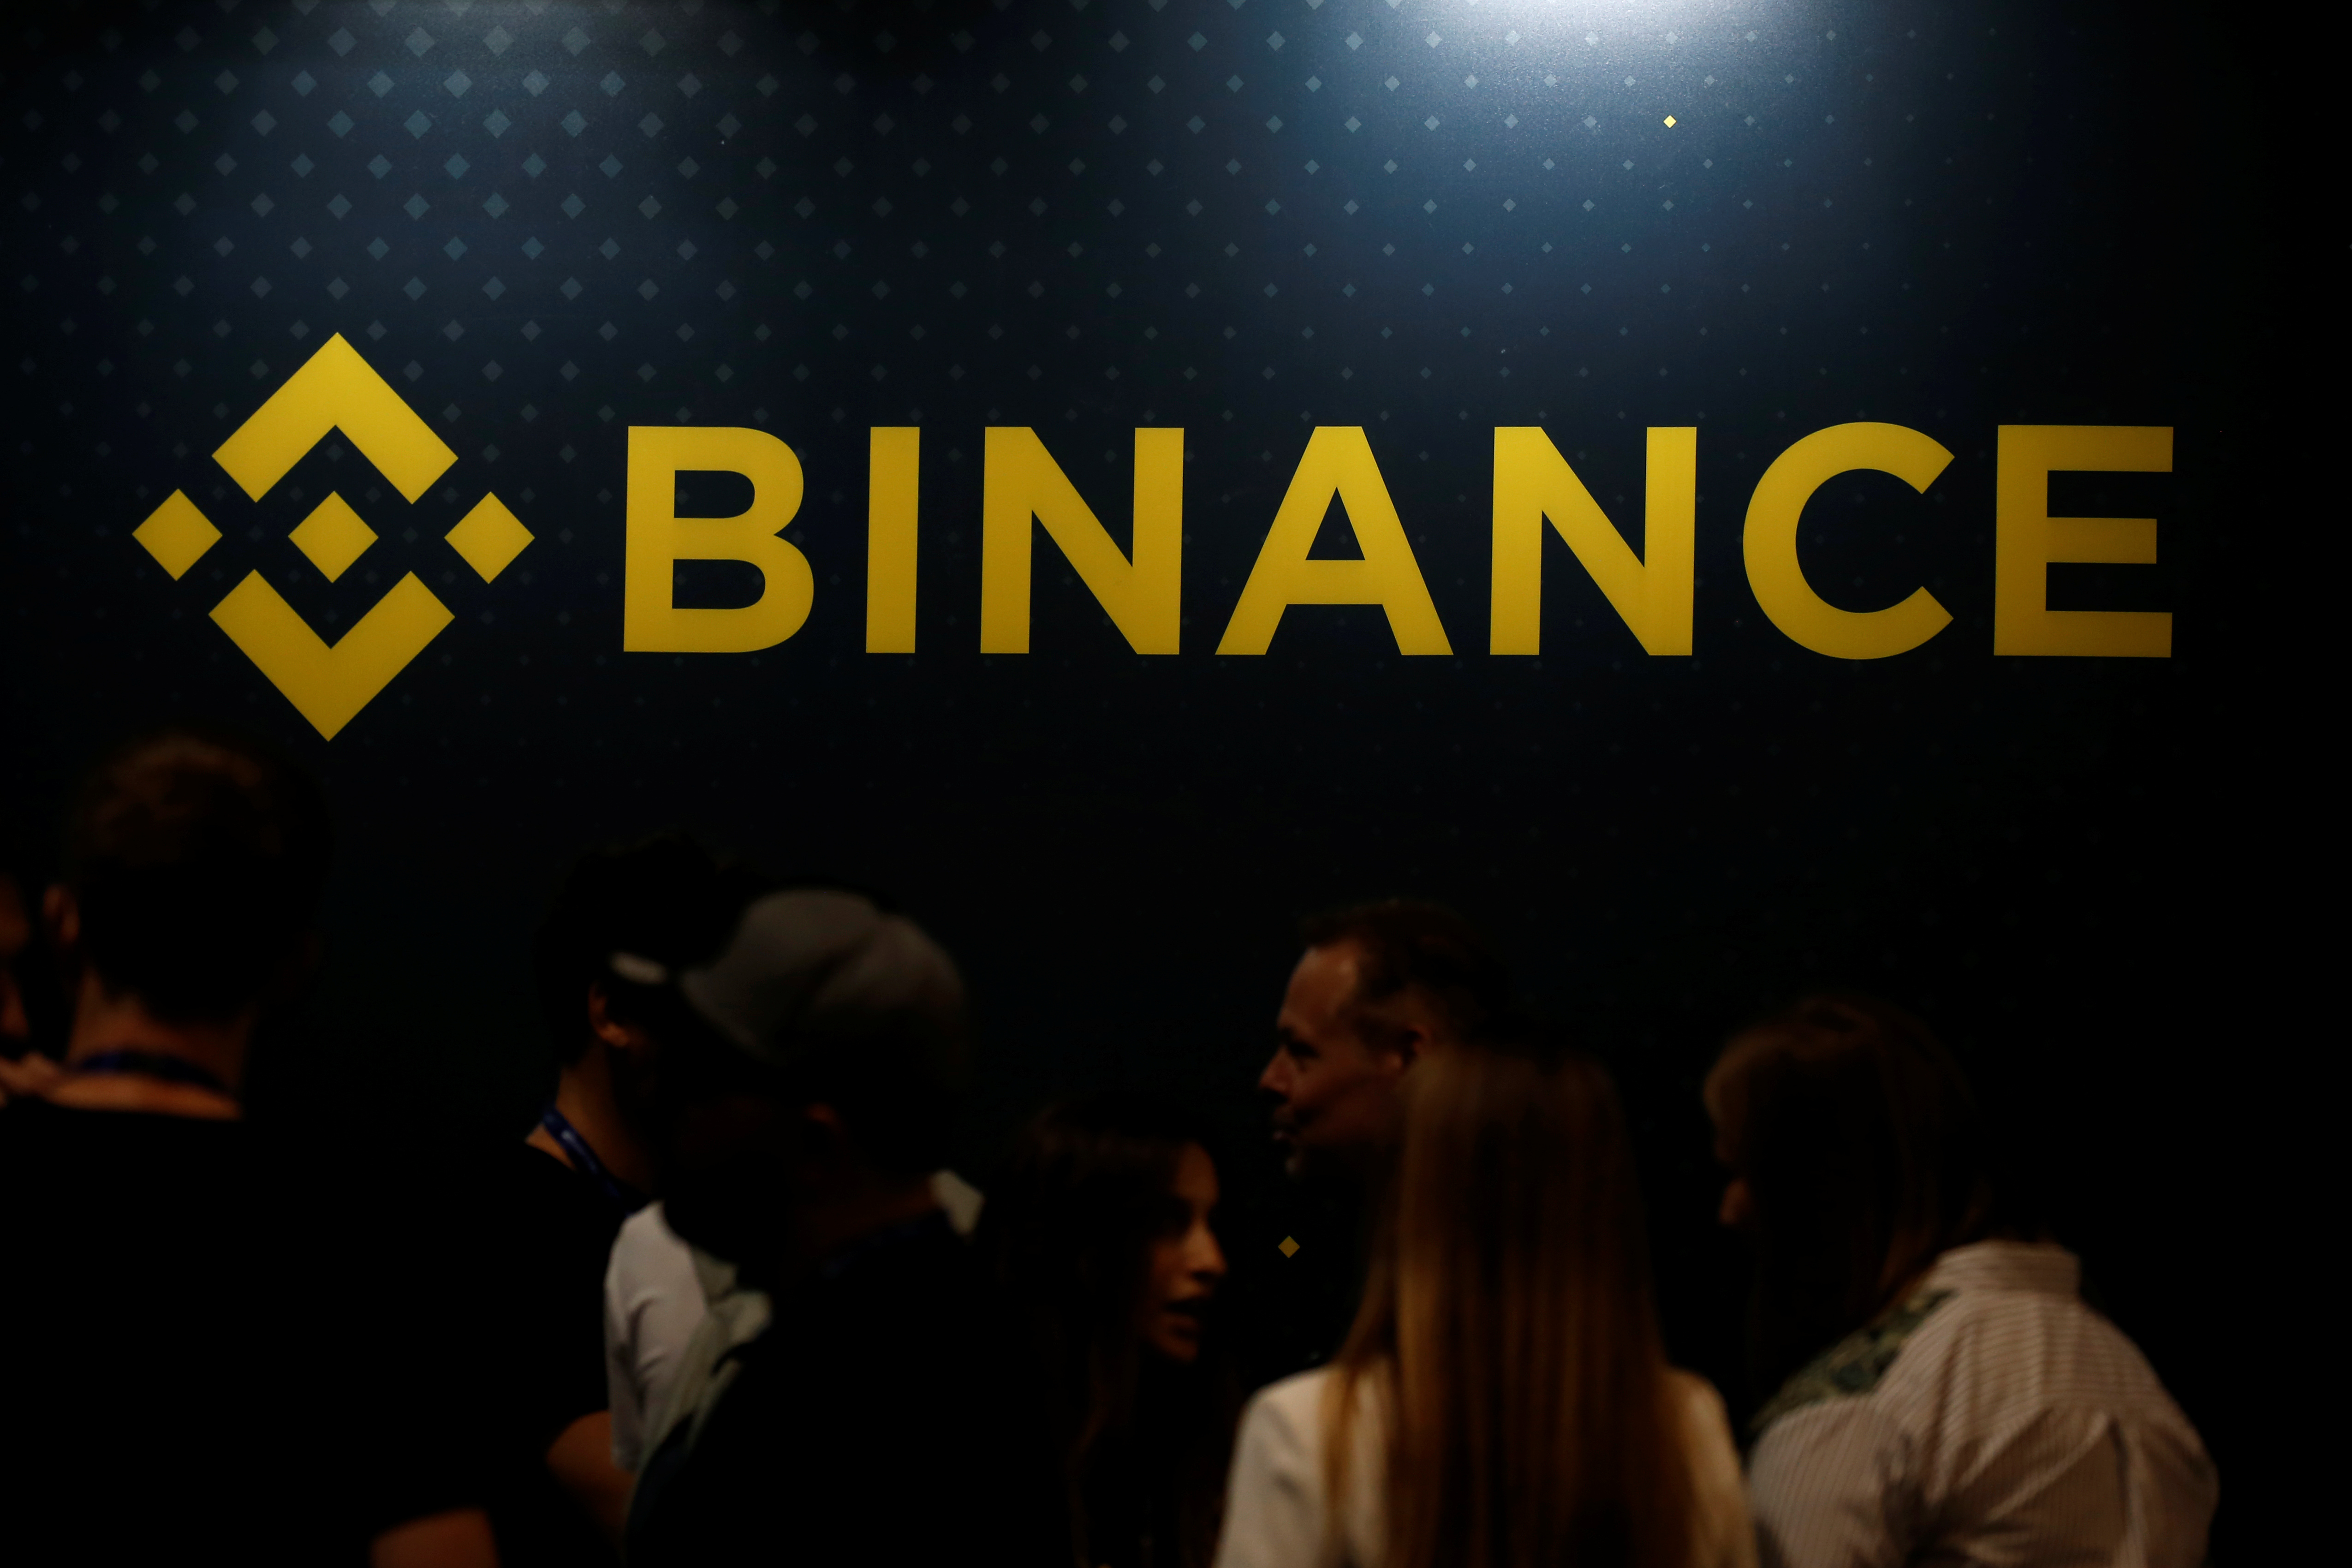 Binance Under The Investigation Of Us Justice Department Again